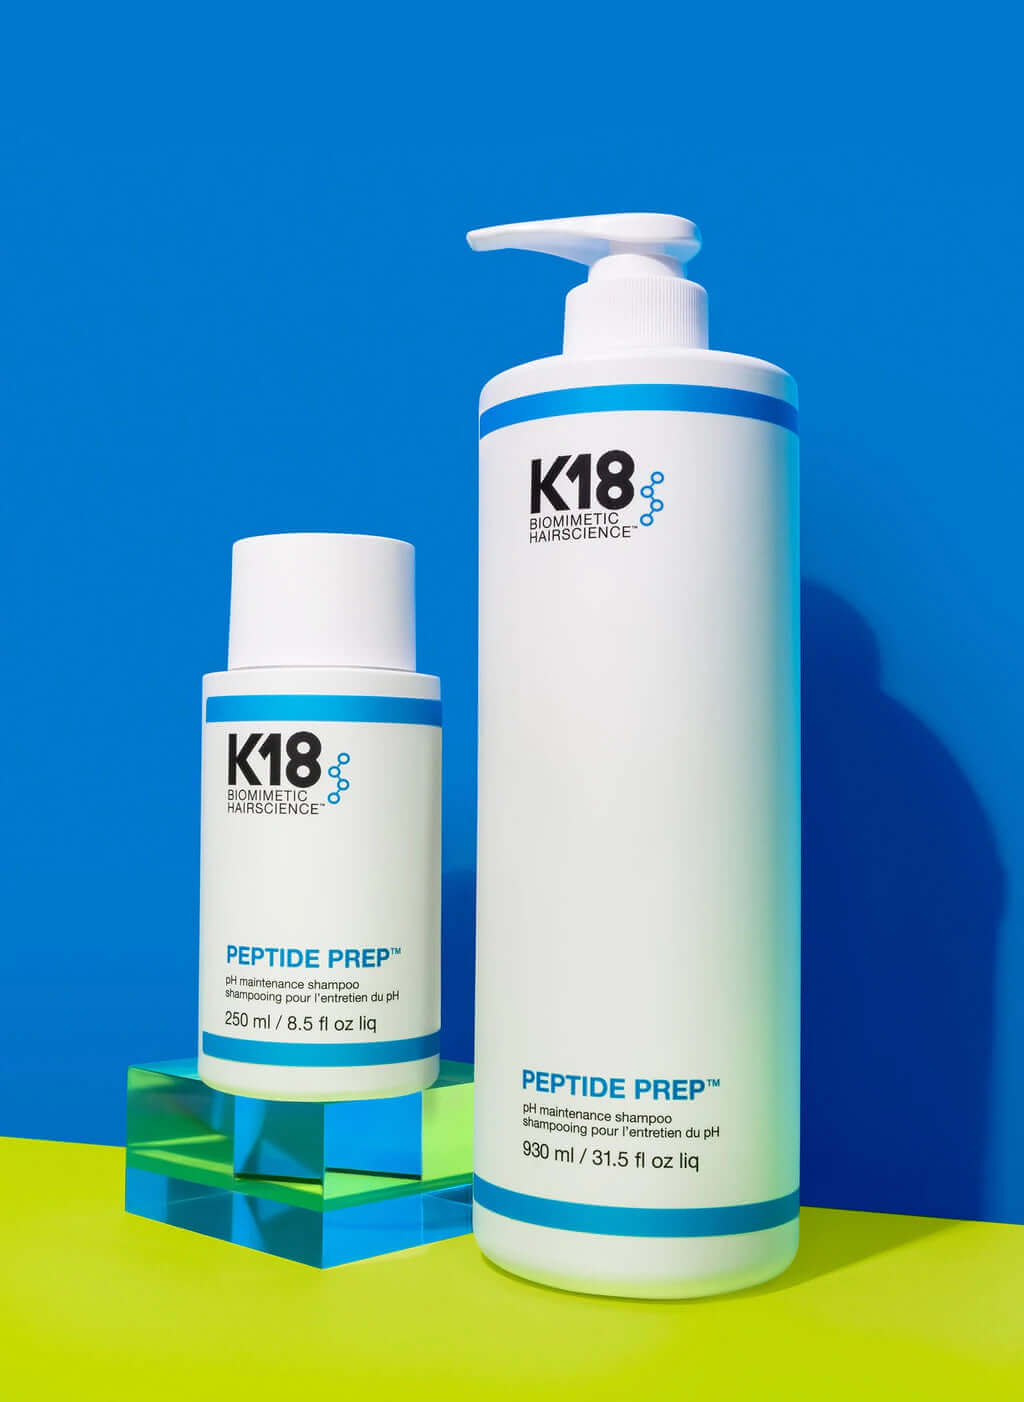 A bottle of K18 DAMAGE SHIELD pH Protective Shampoo from K18 Hair Repair and a bottle of cleansing shampoo on a blue and yellow background.